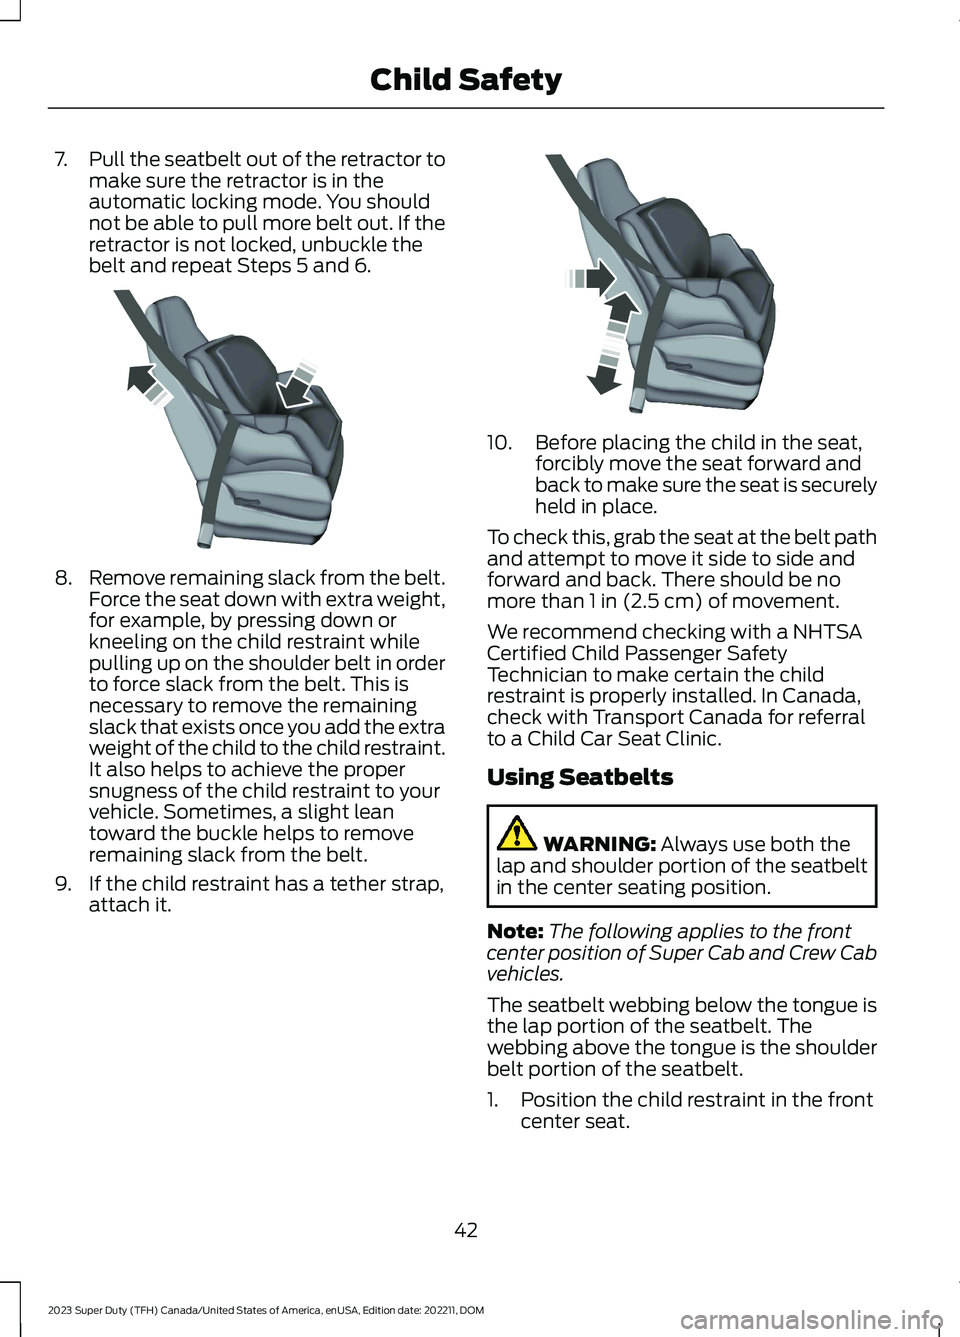 FORD SUPER DUTY 2023  Owners Manual 7.Pull the seatbelt out of the retractor tomake sure the retractor is in theautomatic locking mode. You shouldnot be able to pull more belt out. If theretractor is not locked, unbuckle thebelt and rep